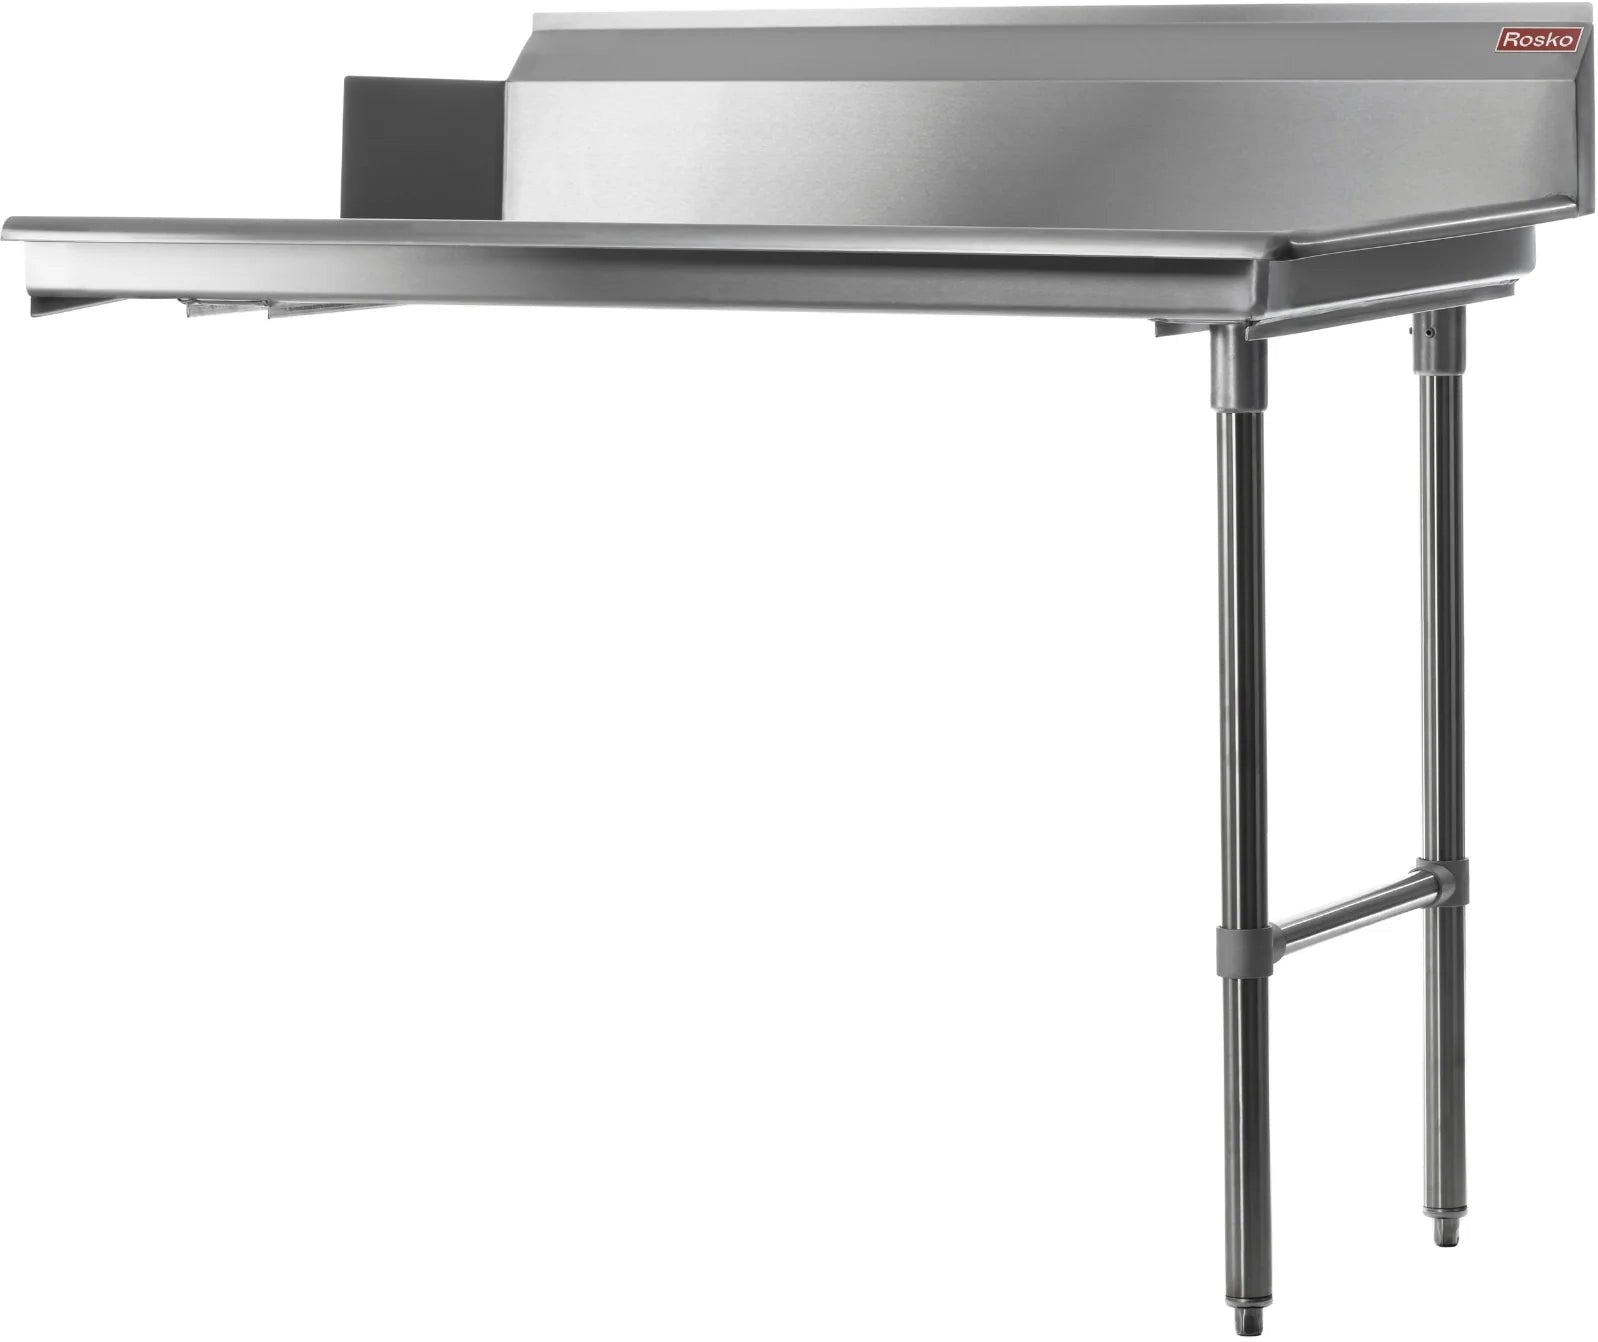 Julien - Rosko 48" x 30" Clean Dish Table, Right Side, Stainless Steel - RO-CDT-4830-R